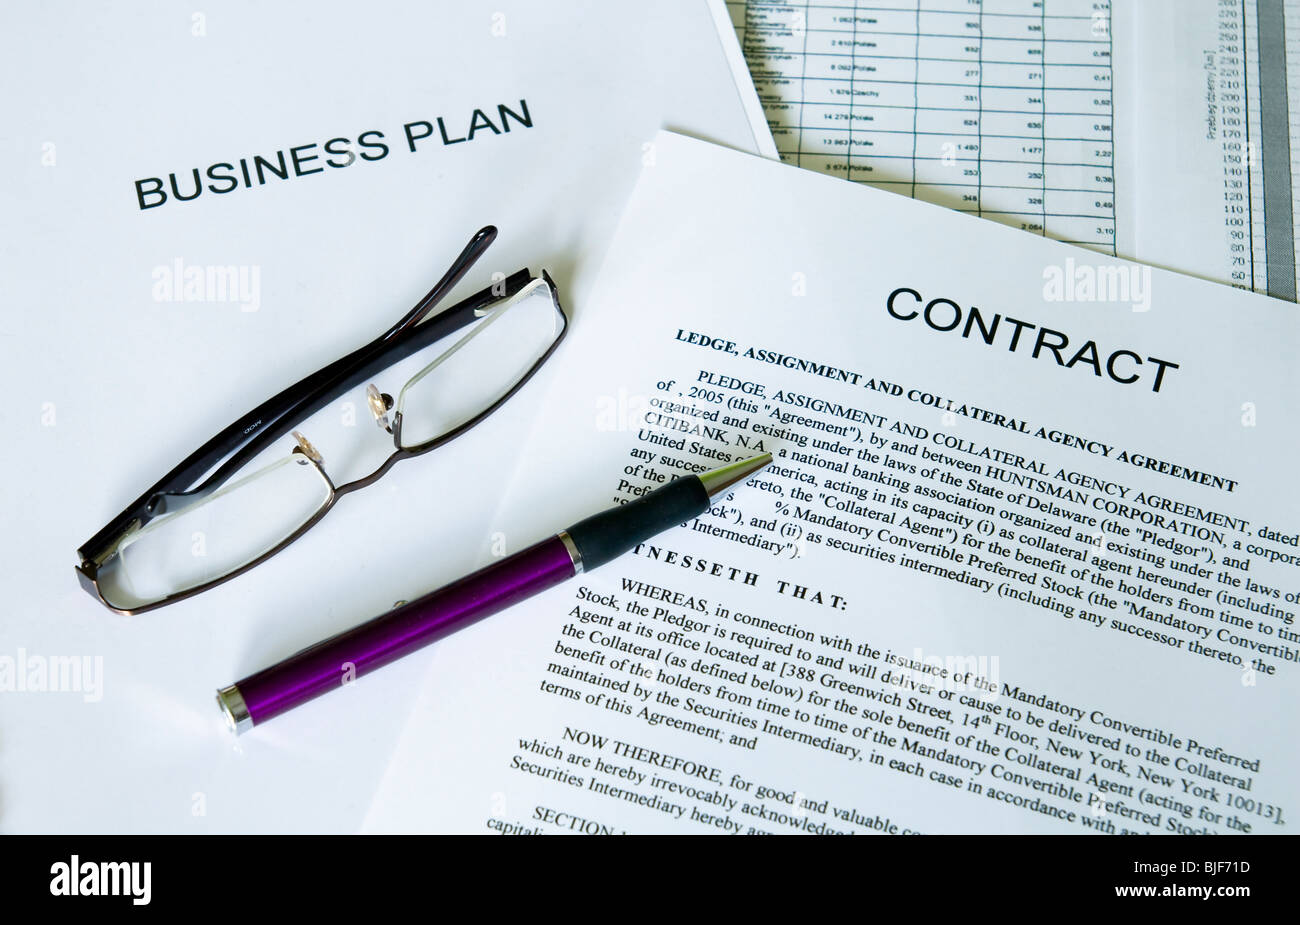 selective focus image of business plan, contract, ballpoint pen and glasses Stock Photo